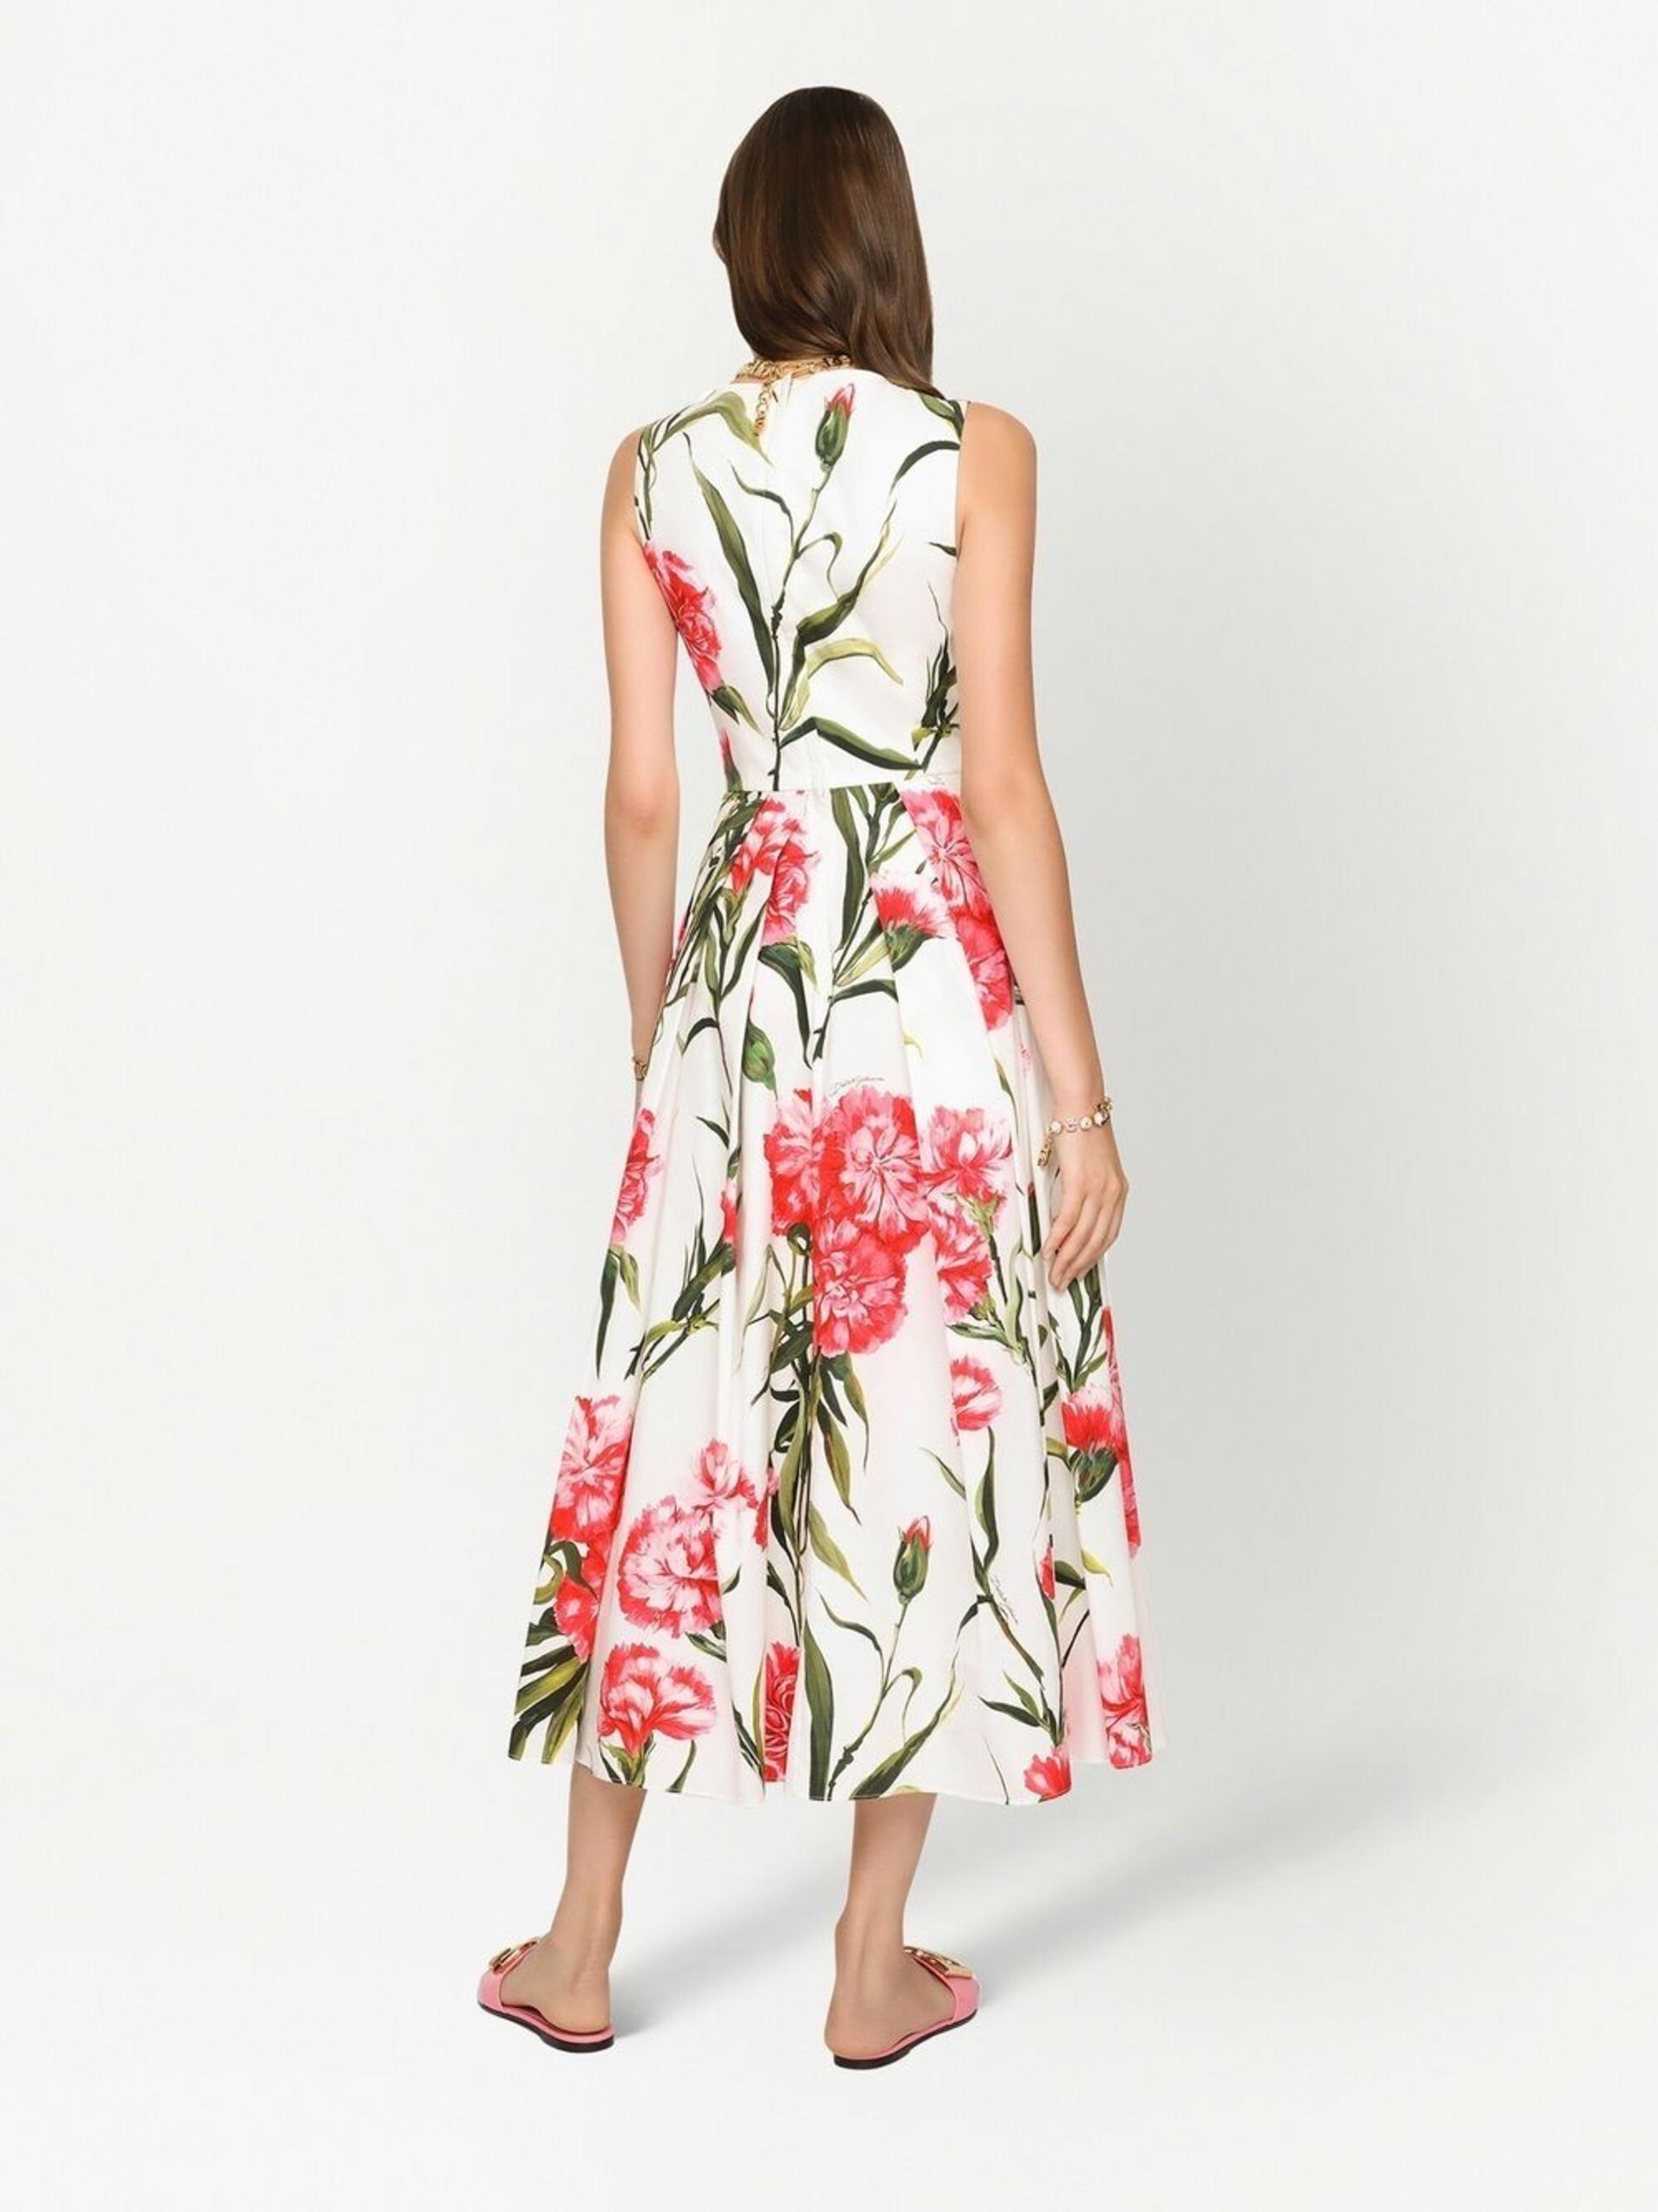 Dolce & Gabbana All-over Floral Print Midi Dress in White | Lyst